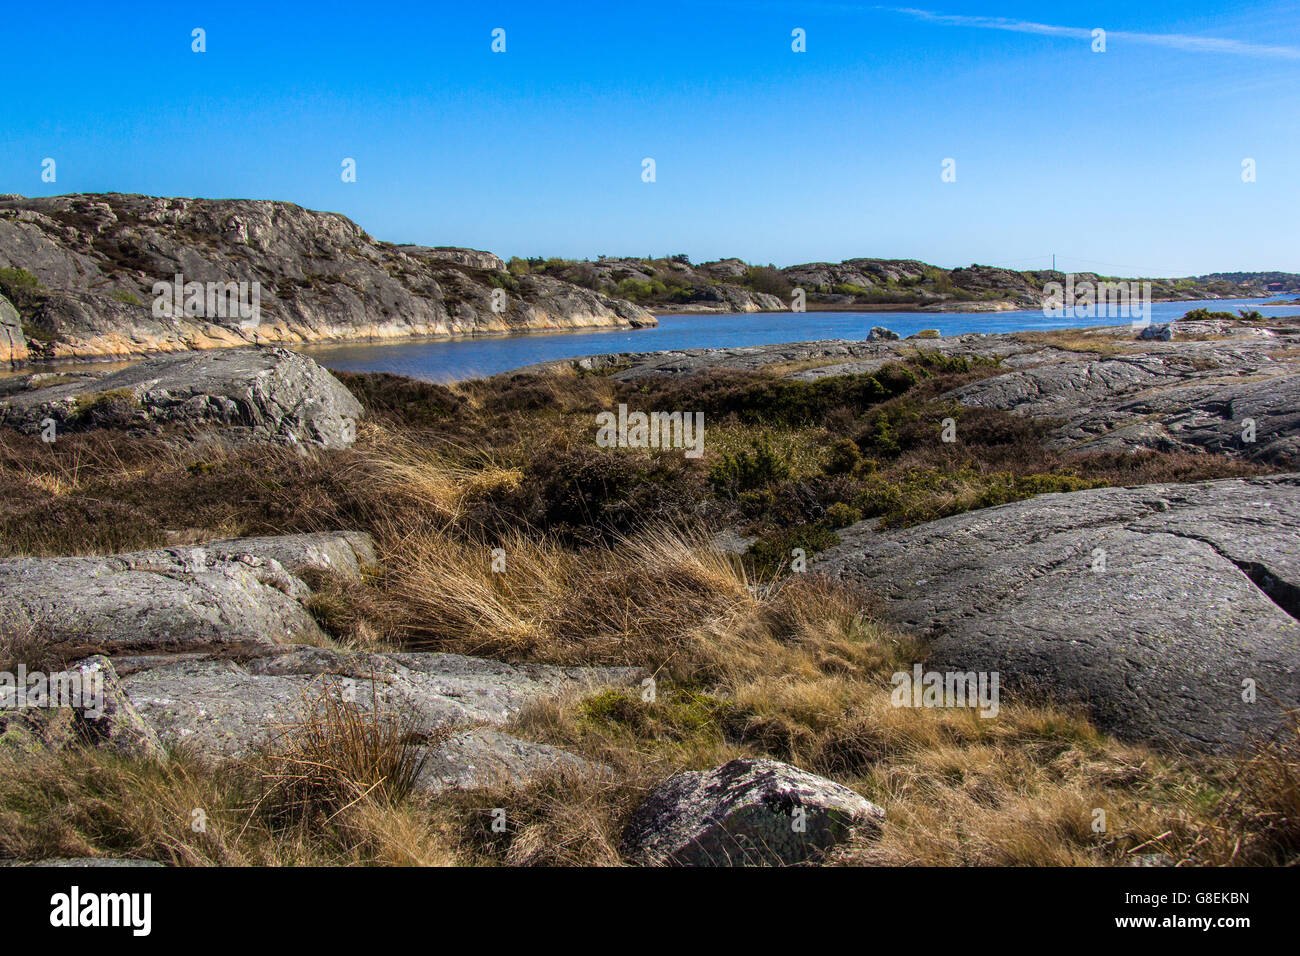 Lovely Islands with beautiful -Gothenburg, Sweden Photo - Alamy